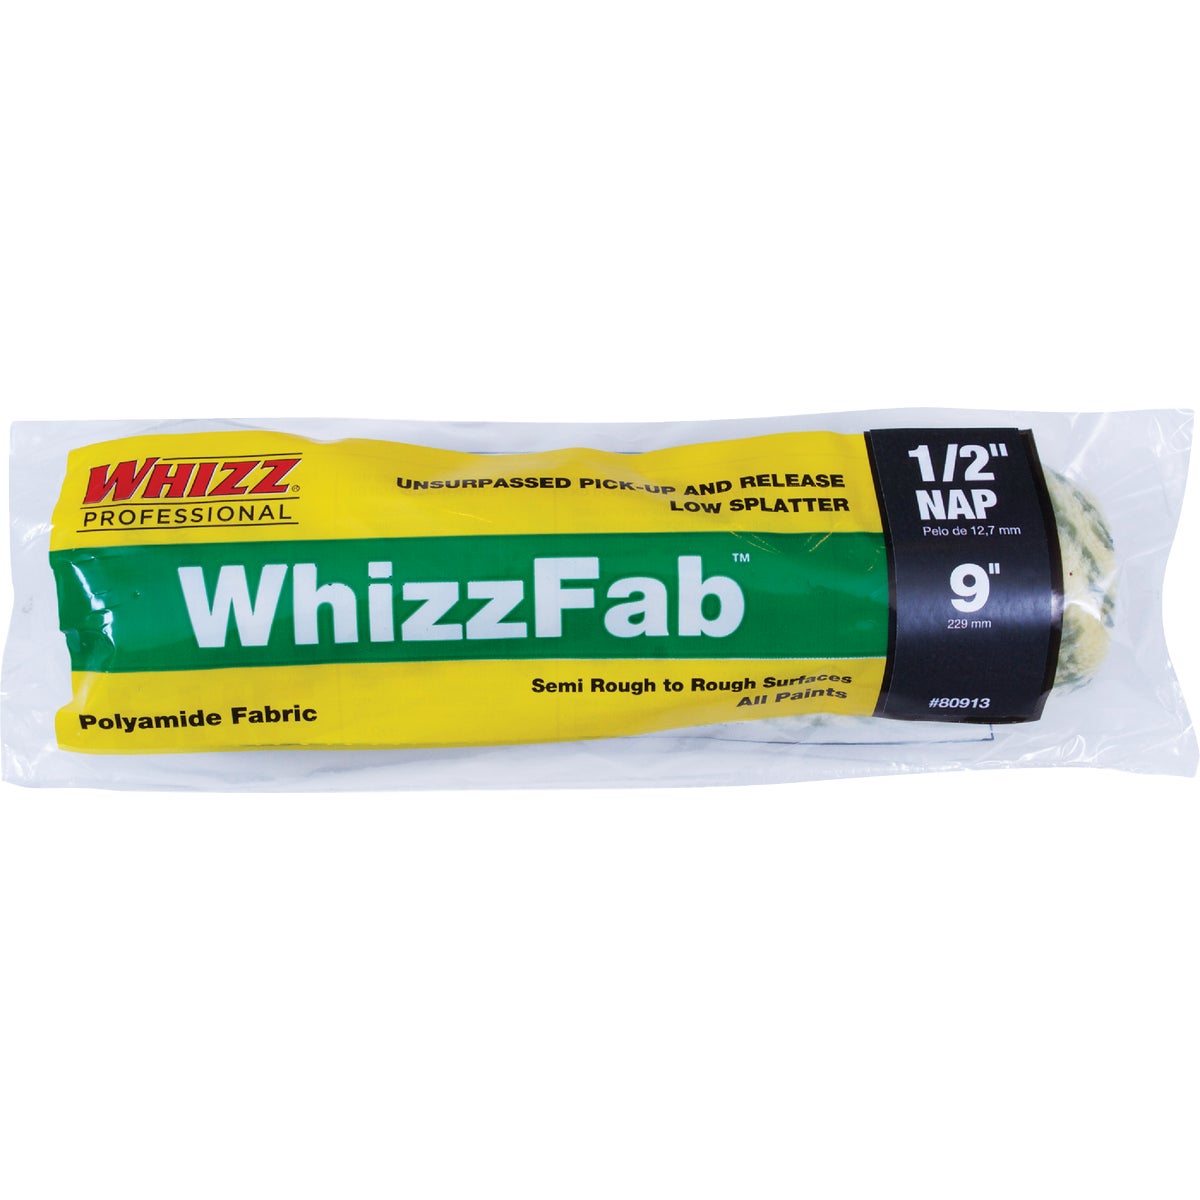 WhizzFab 9 In. x 1/2 In. Polyamide Fabric Cage Roller Cover